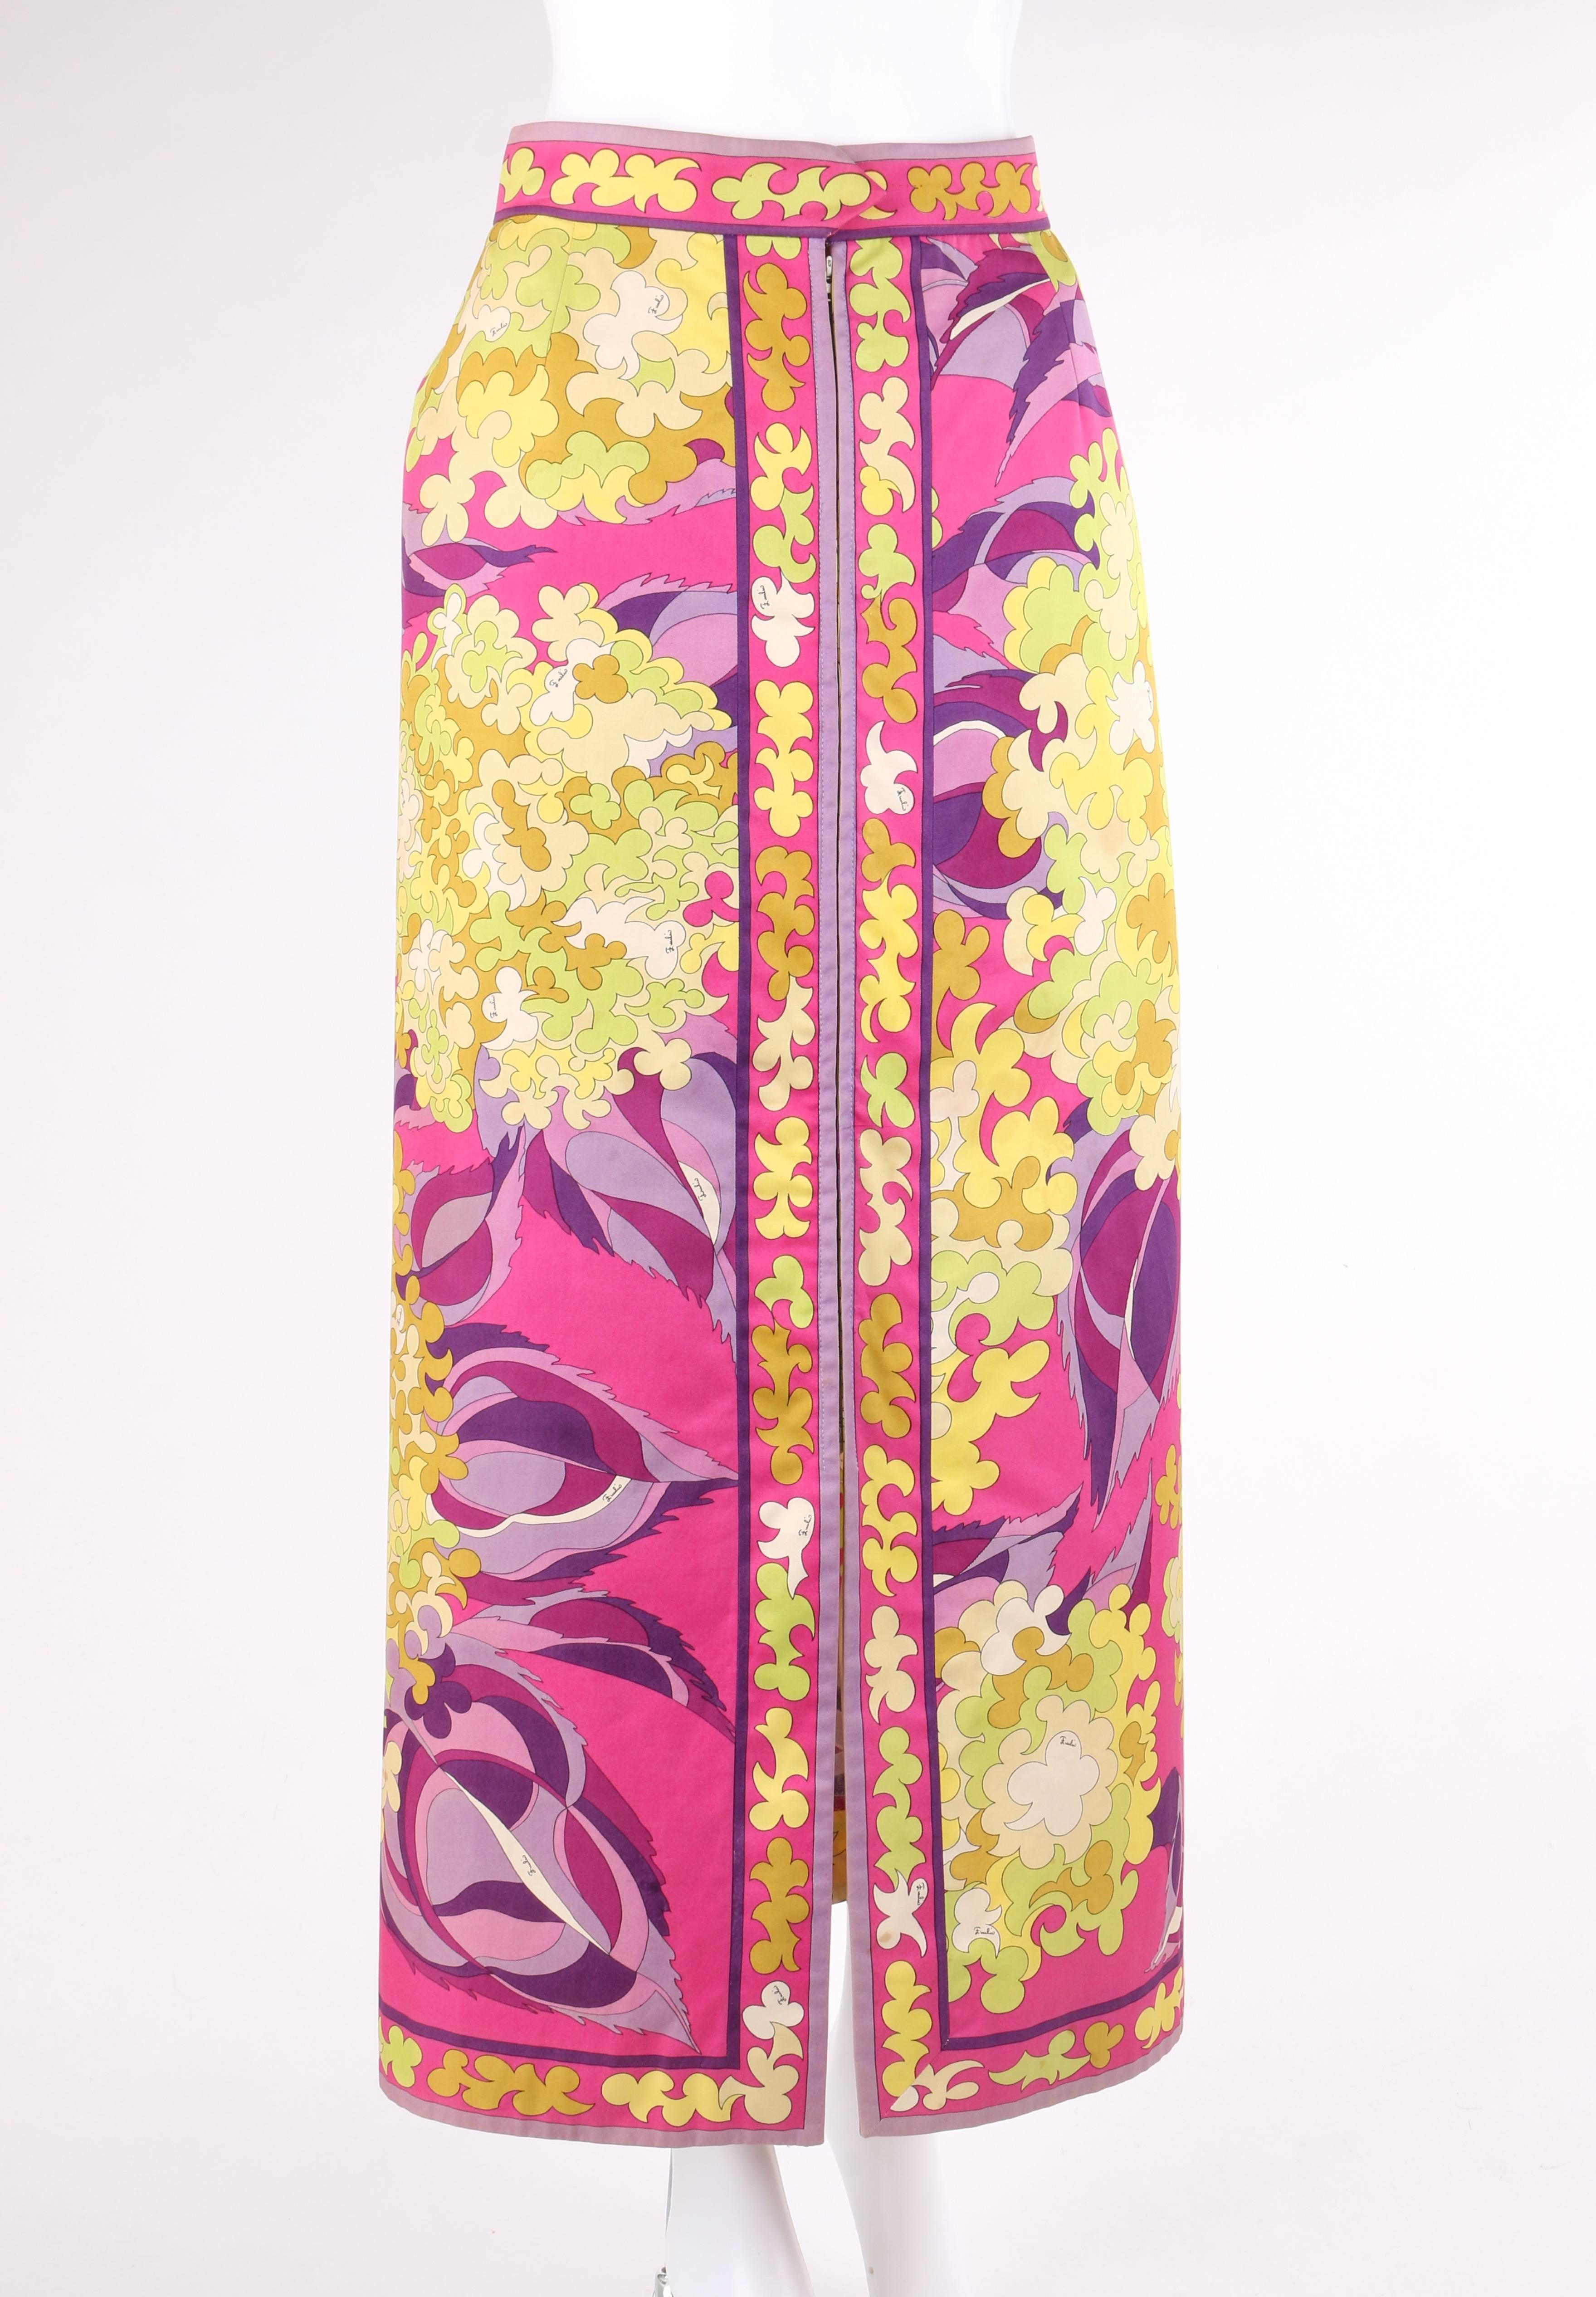 Vintage Emilio Pucci exclusively for Saks Fifth Avenue c.1960's floral signature print maxi skirt. Large floral windowpane signature print in shades of yellow, fuchsia, purple, and white. Banded waist with two snap closures at front. Center front